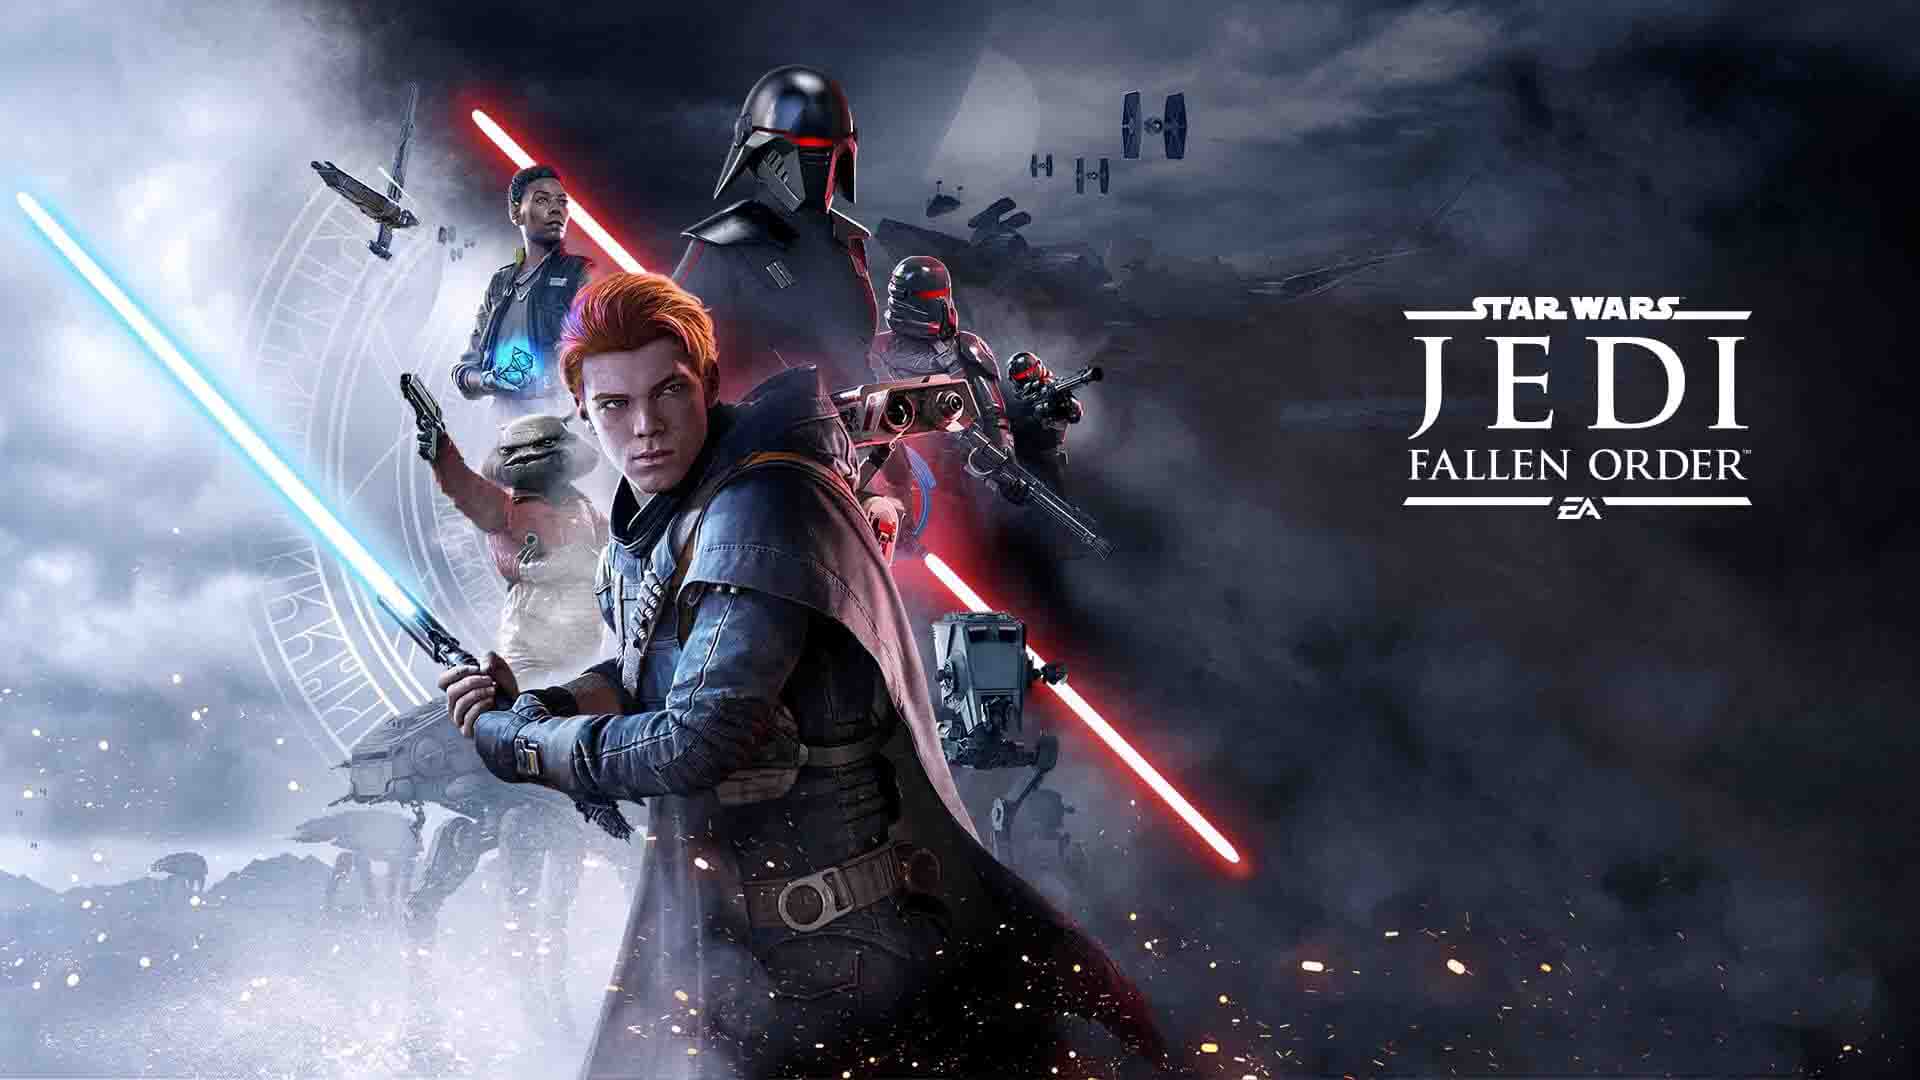 STAR WARS Jedi: Fallen Order System Requirements for PC Games minimum, recommended specifications for Windows, CPU, OS, Processor, RAM Memory, Storage, and GPU.